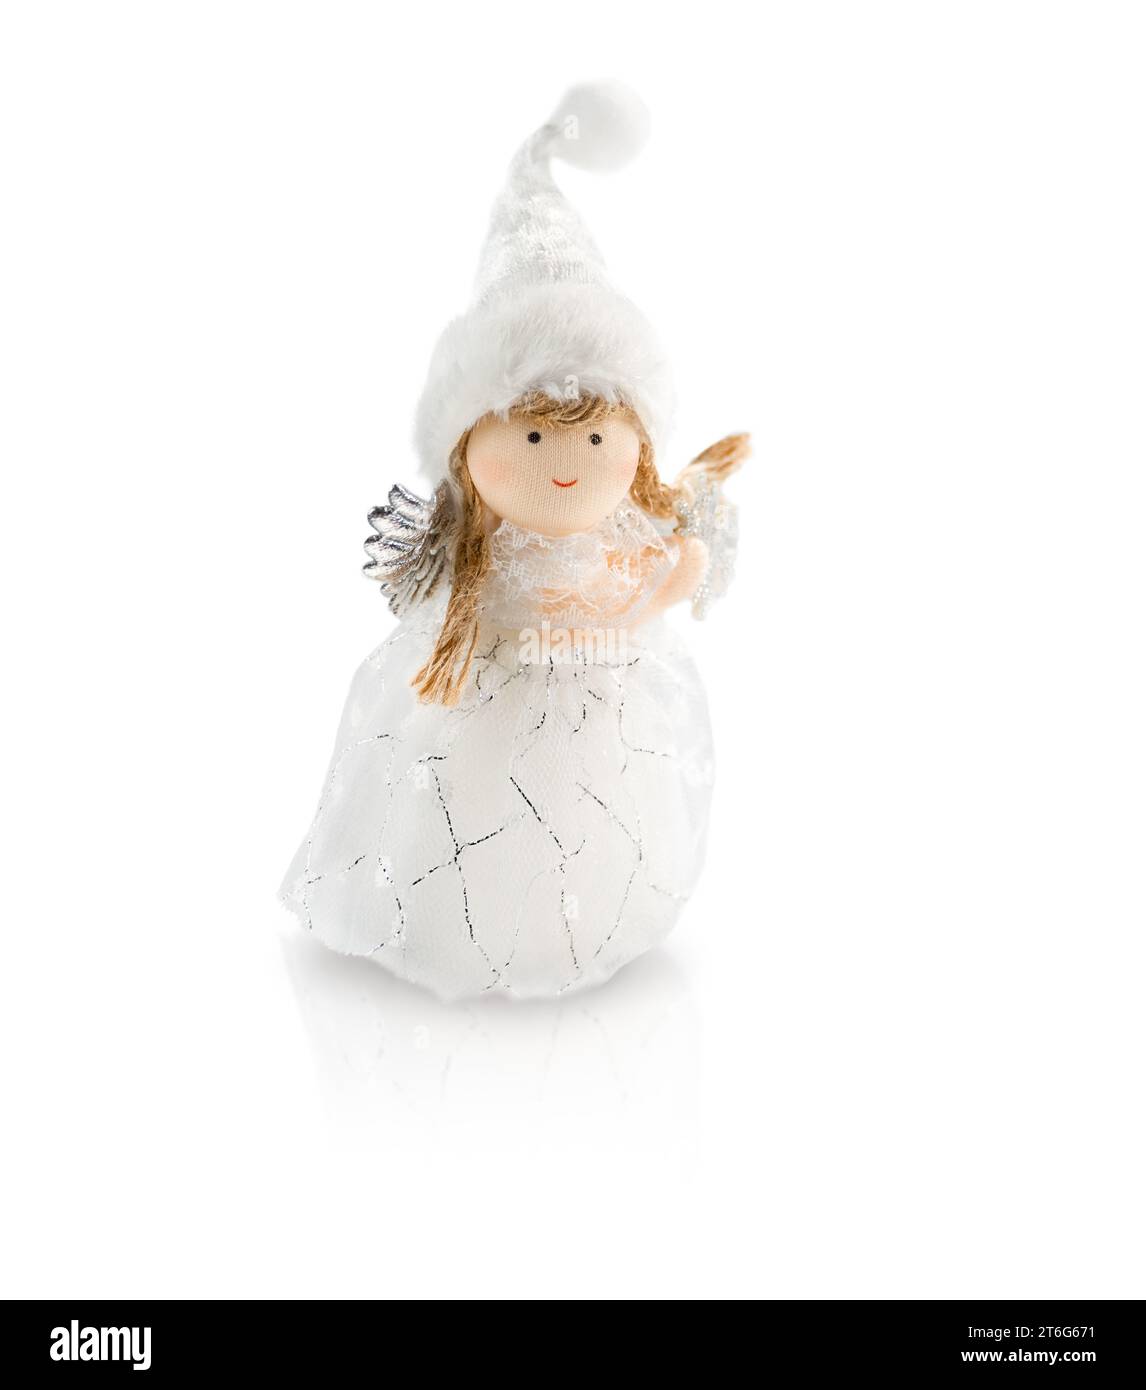 Angel toy in white dress and cap isolated on white background Stock Photo